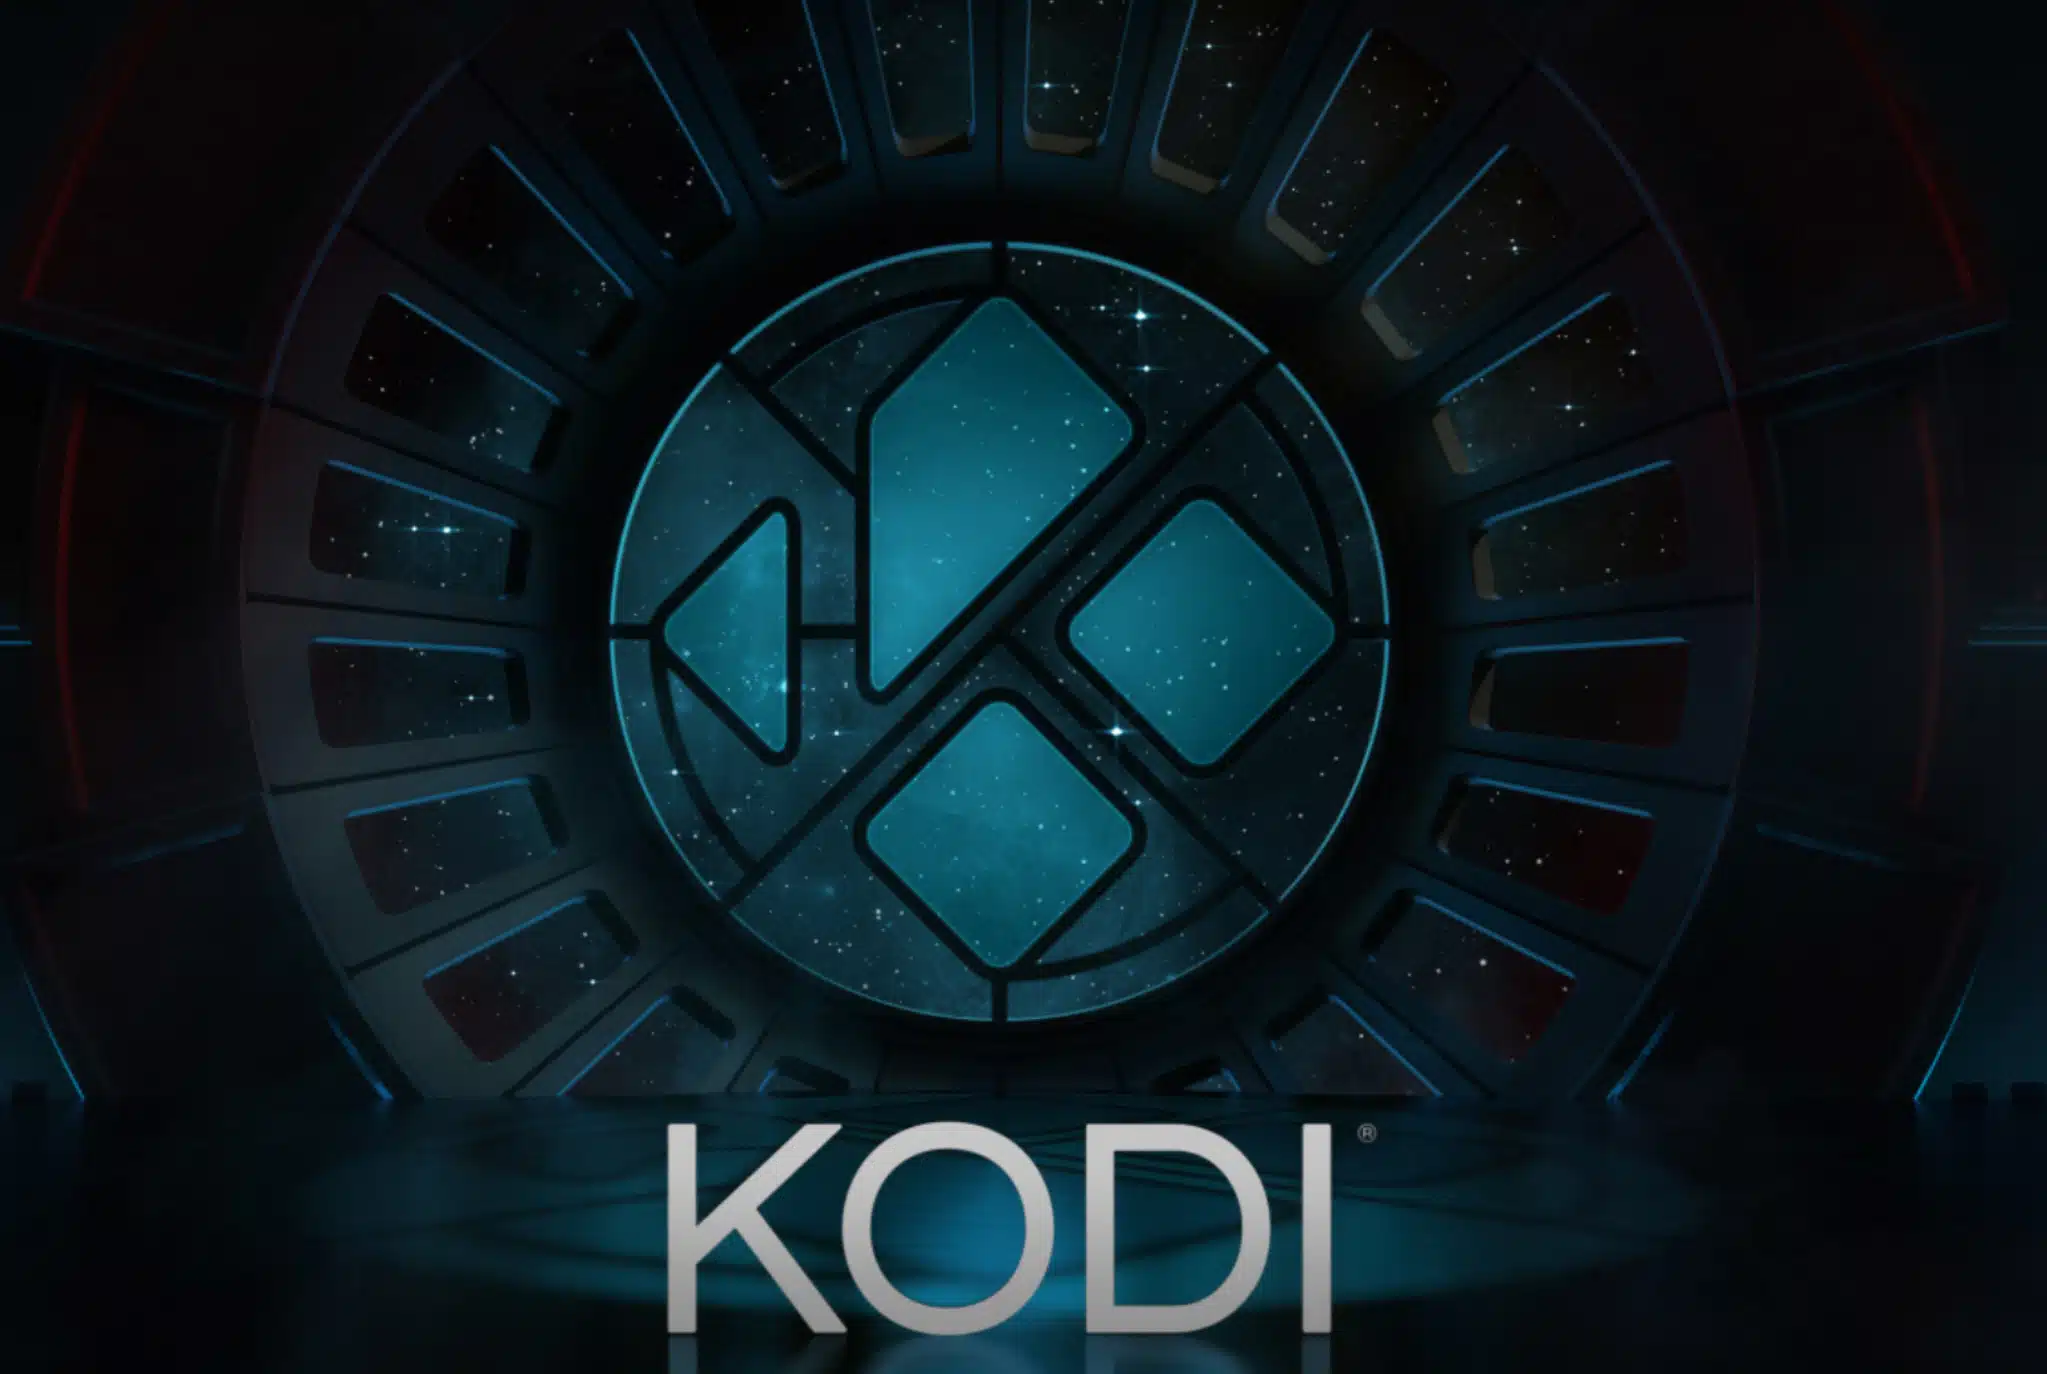 kodi download for android